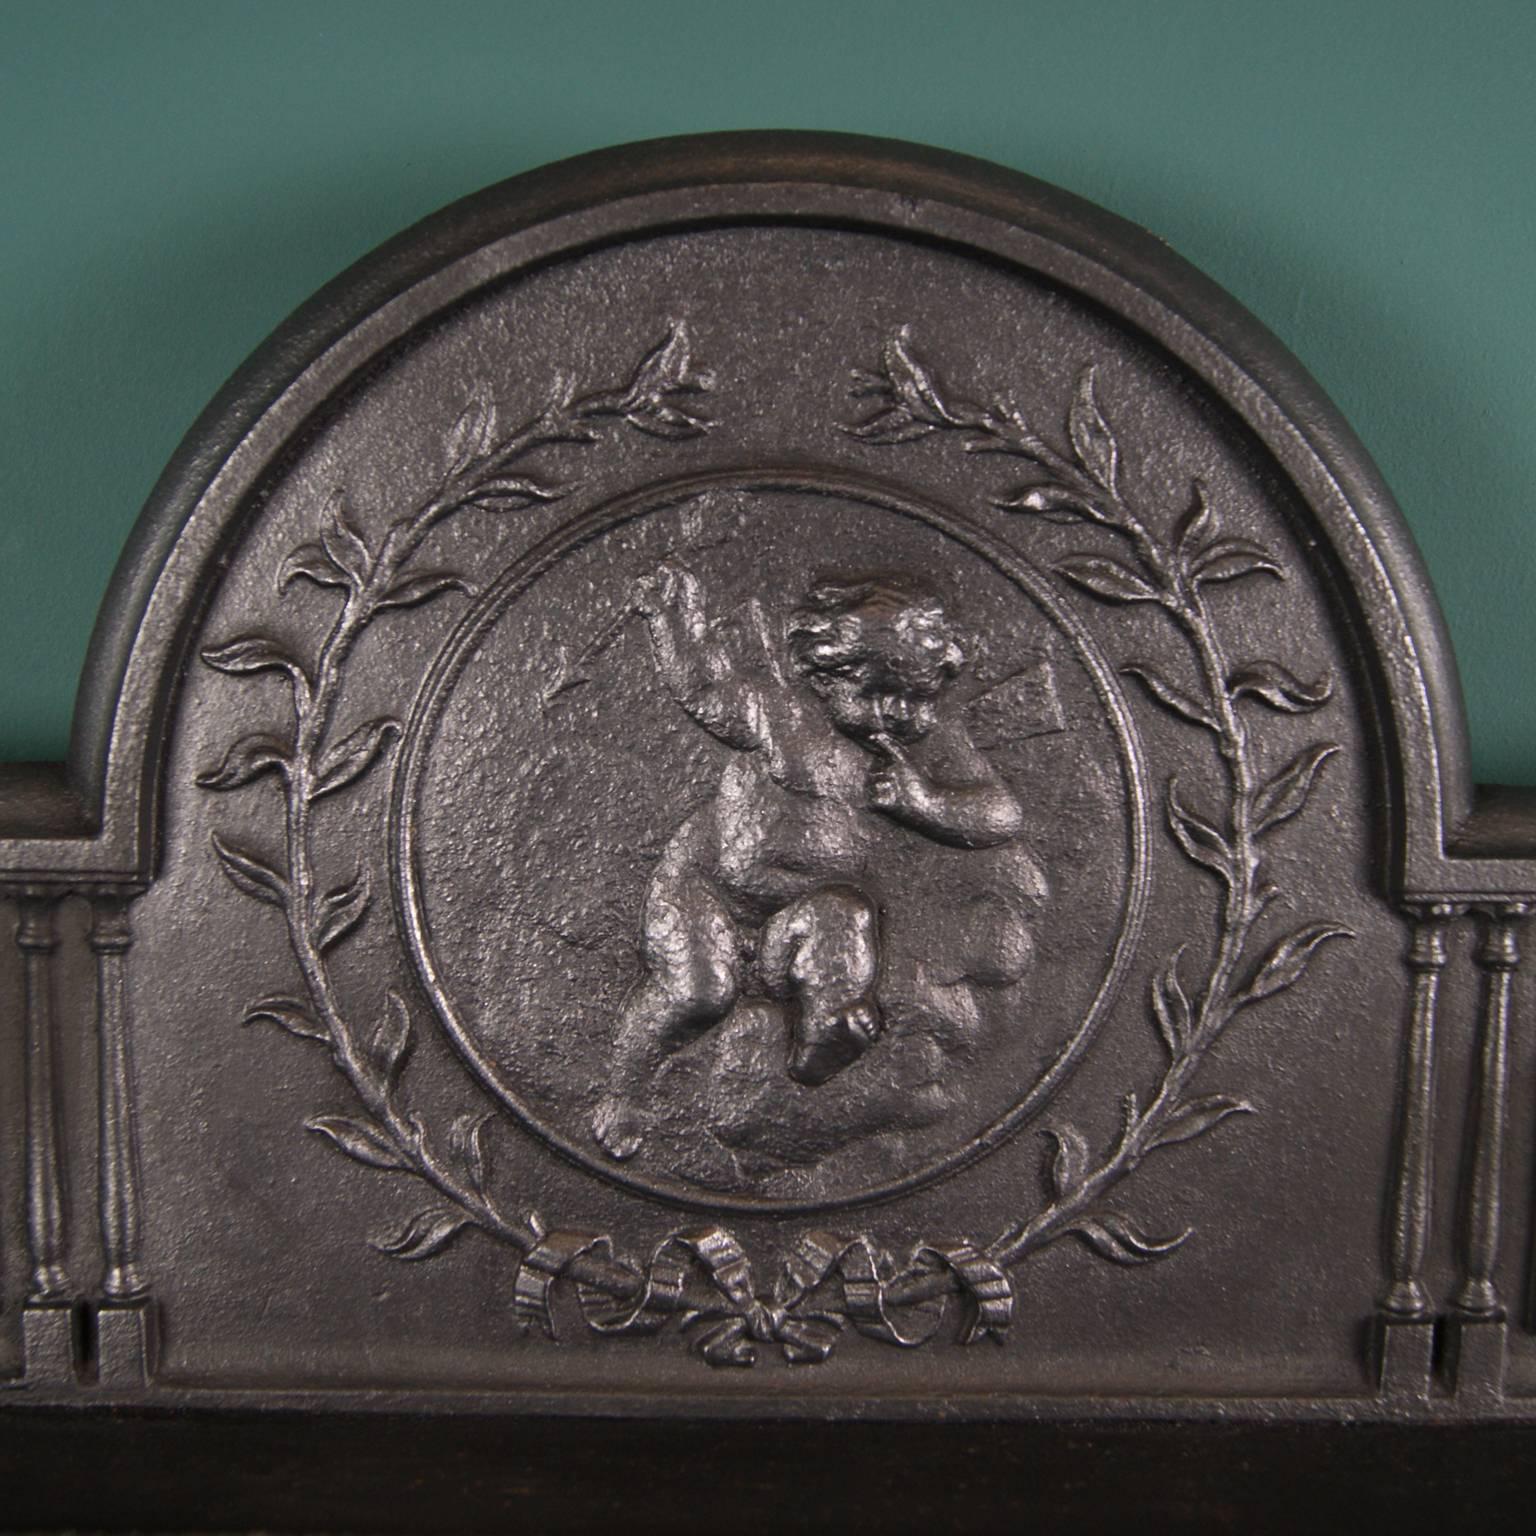 A 19th century ornate Carron Company hob grate with intricate geometric and foliage pattern to hob sides and fire bars, framed with beading detail. Cherub and wreath central motif on shaped fireback. Functioning ash pan with ring handle.
Fully